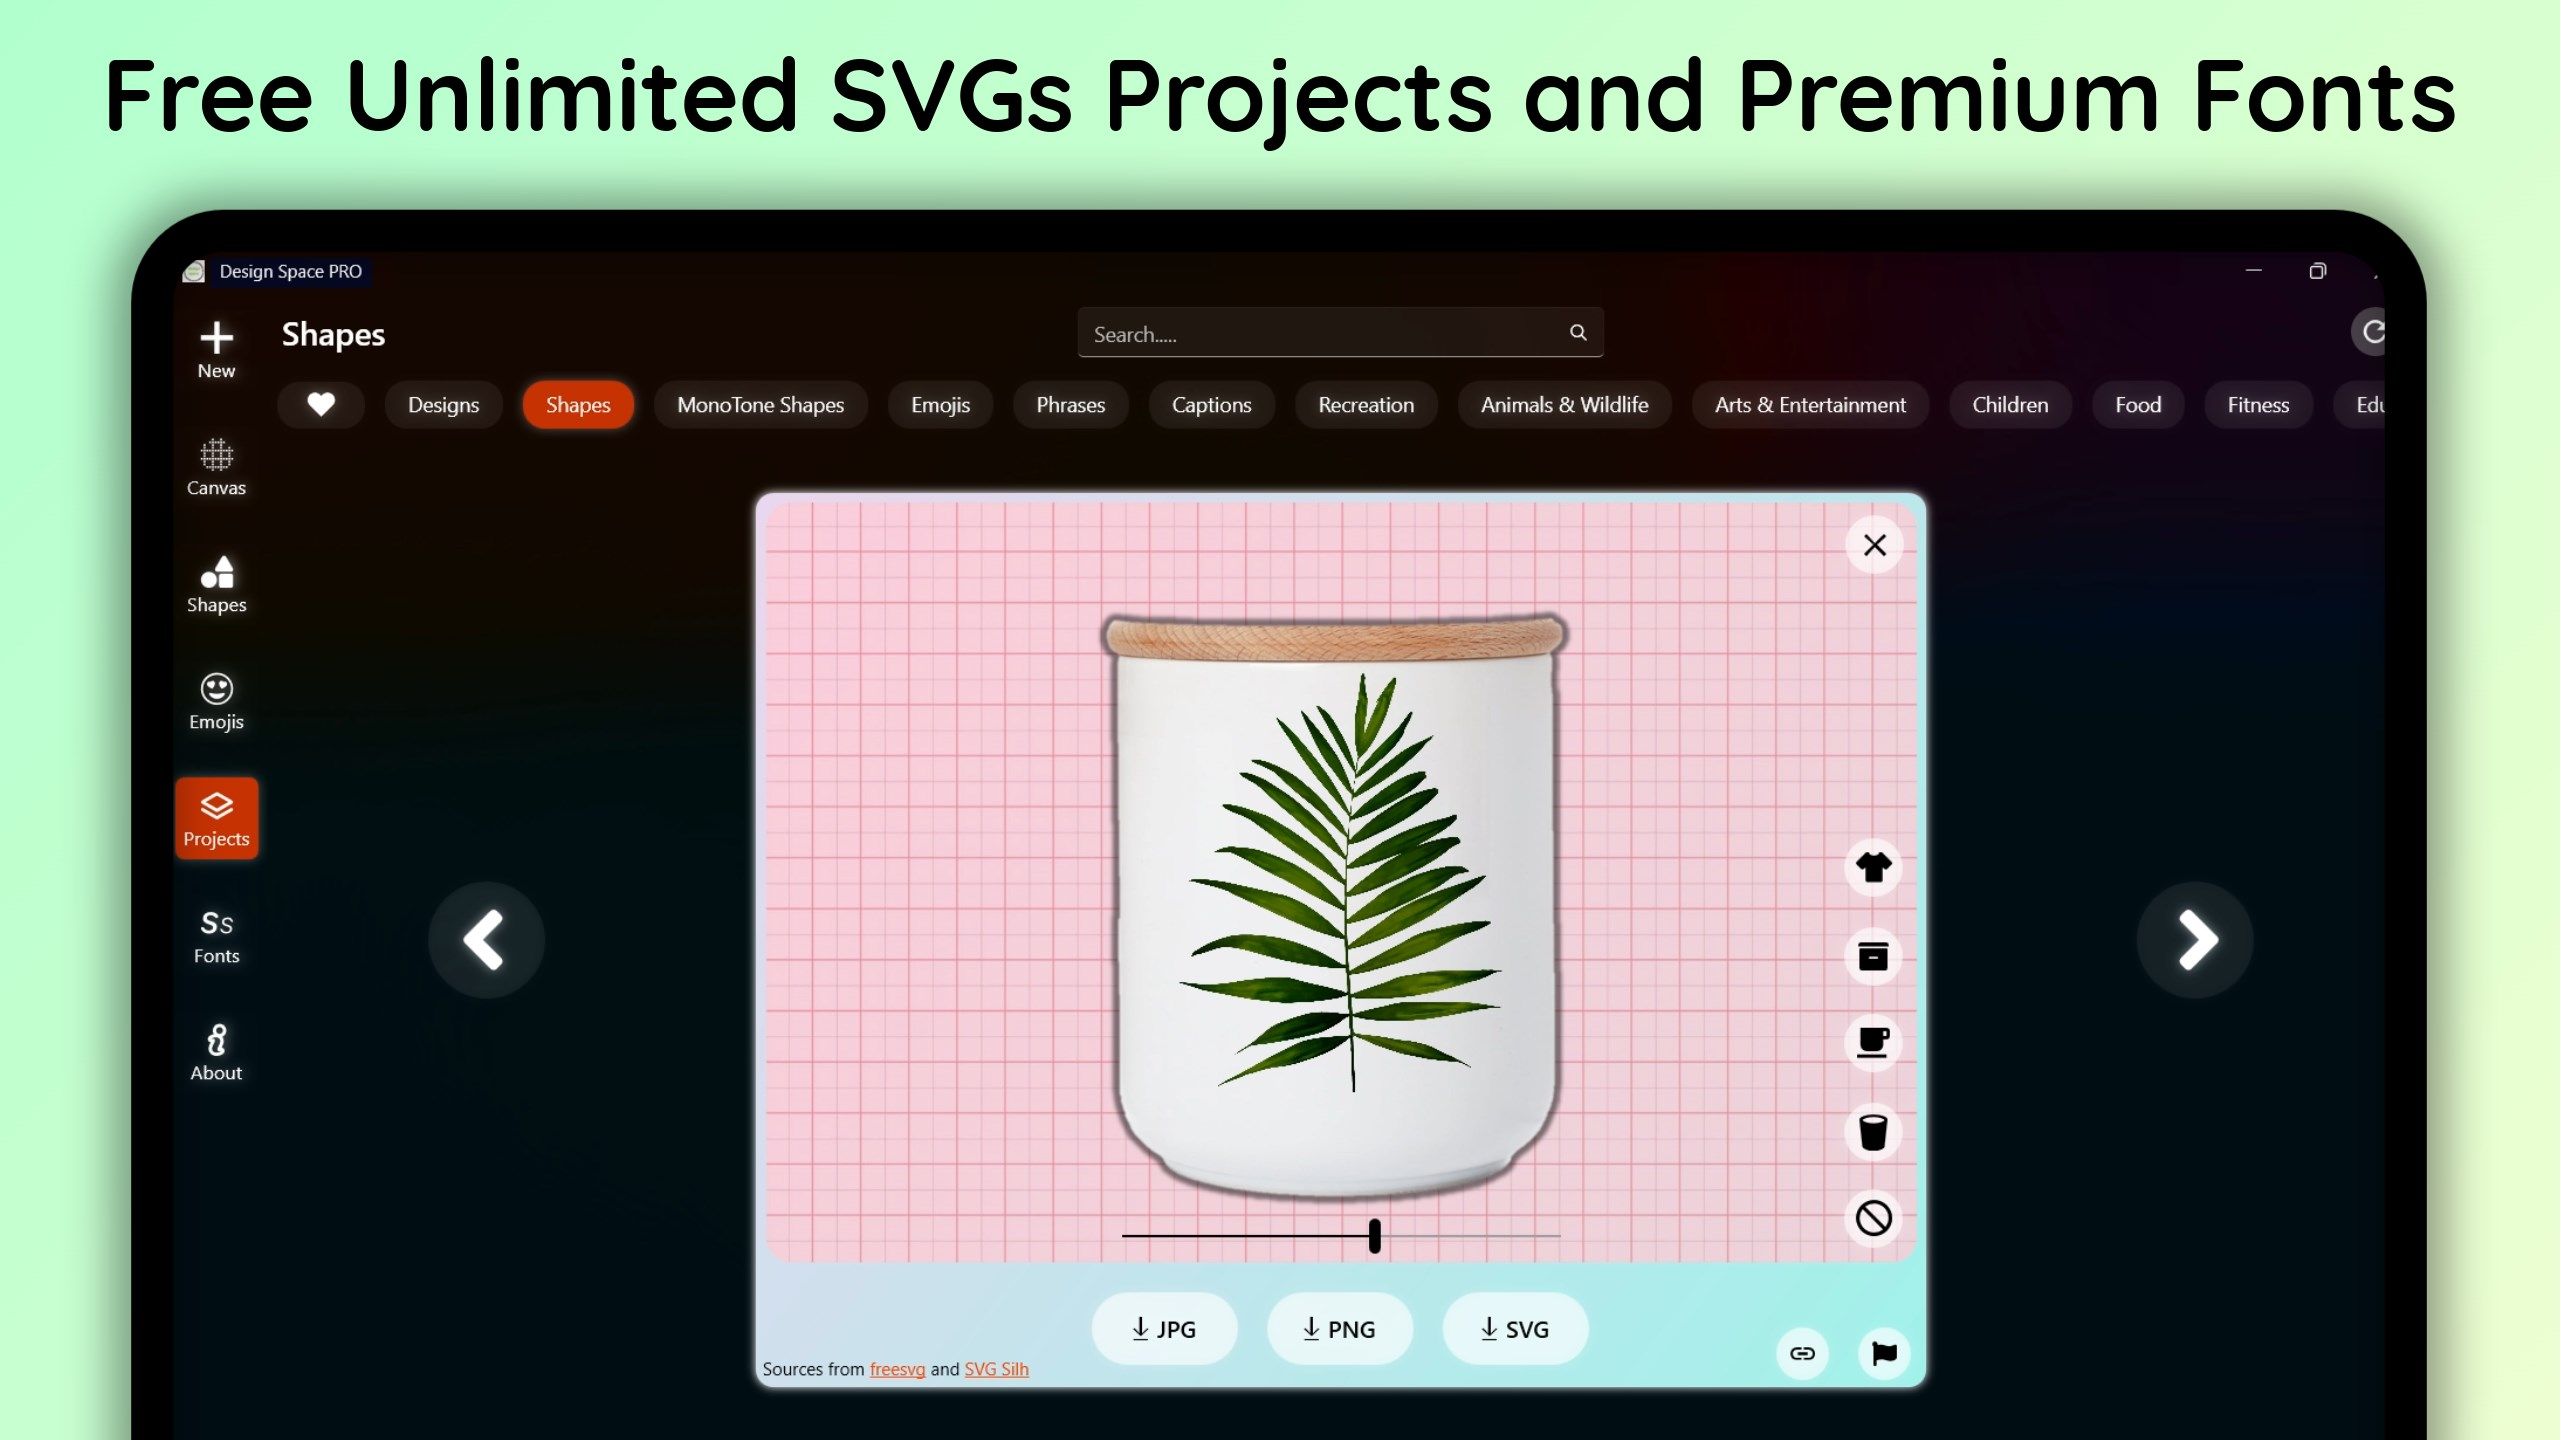 SVG designs view and save to device